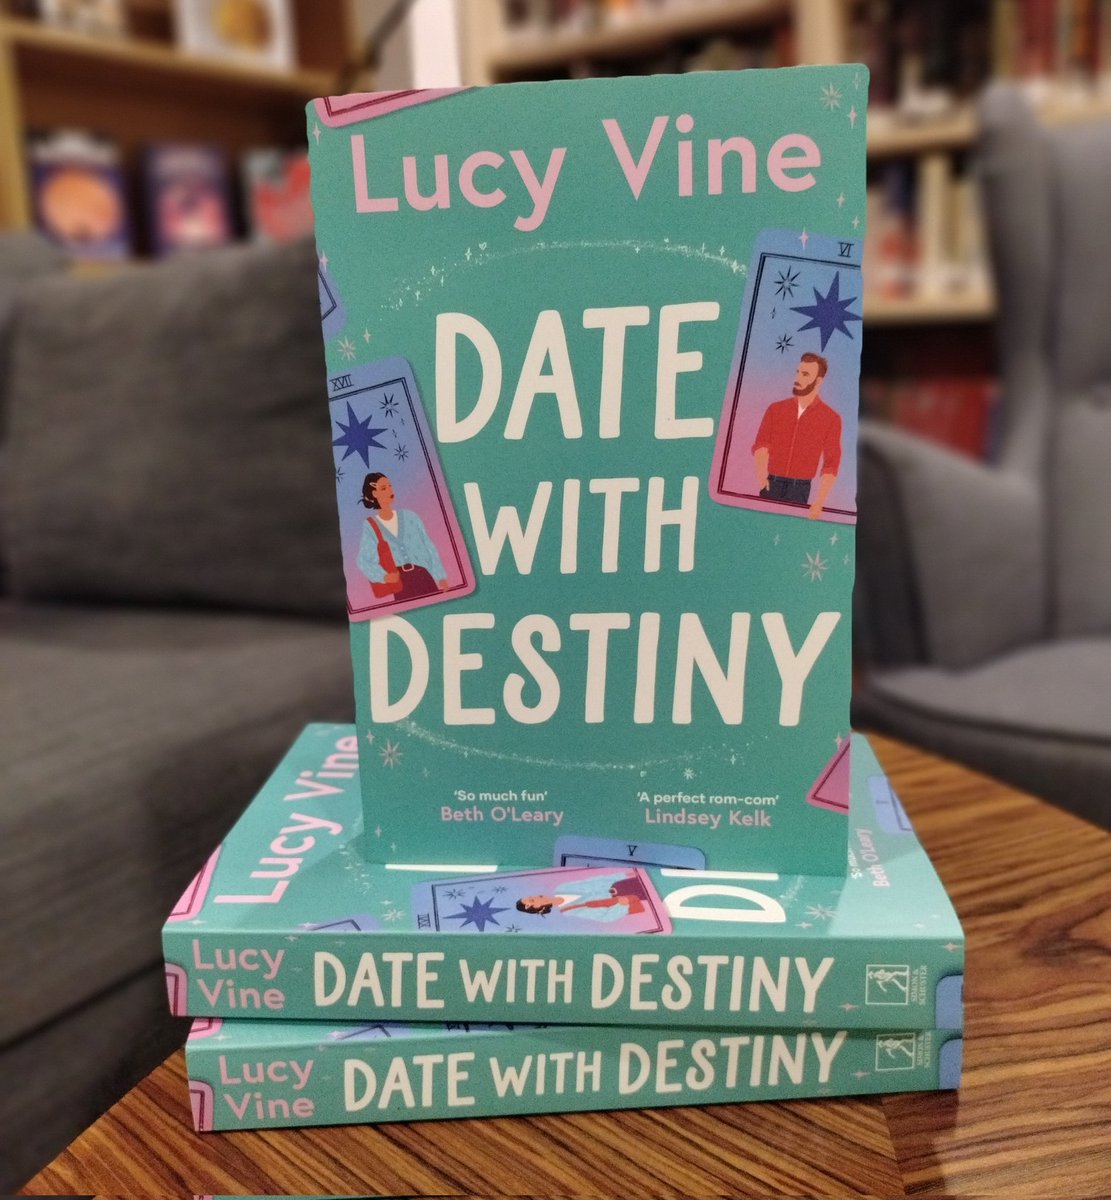 Just 2 weeks left to wait till @Lecv's BRILLIANT new novel #DateWithDestiny publishes... don't delay, pre-order TODAY! 'So much fun' BETH O'LEARY 'A perfect rom-com' LINDSEY KELK 'Hilarious and full of wisdom!' DAISY BUCHANAN simonandschuster.co.uk/books/Date-wit…